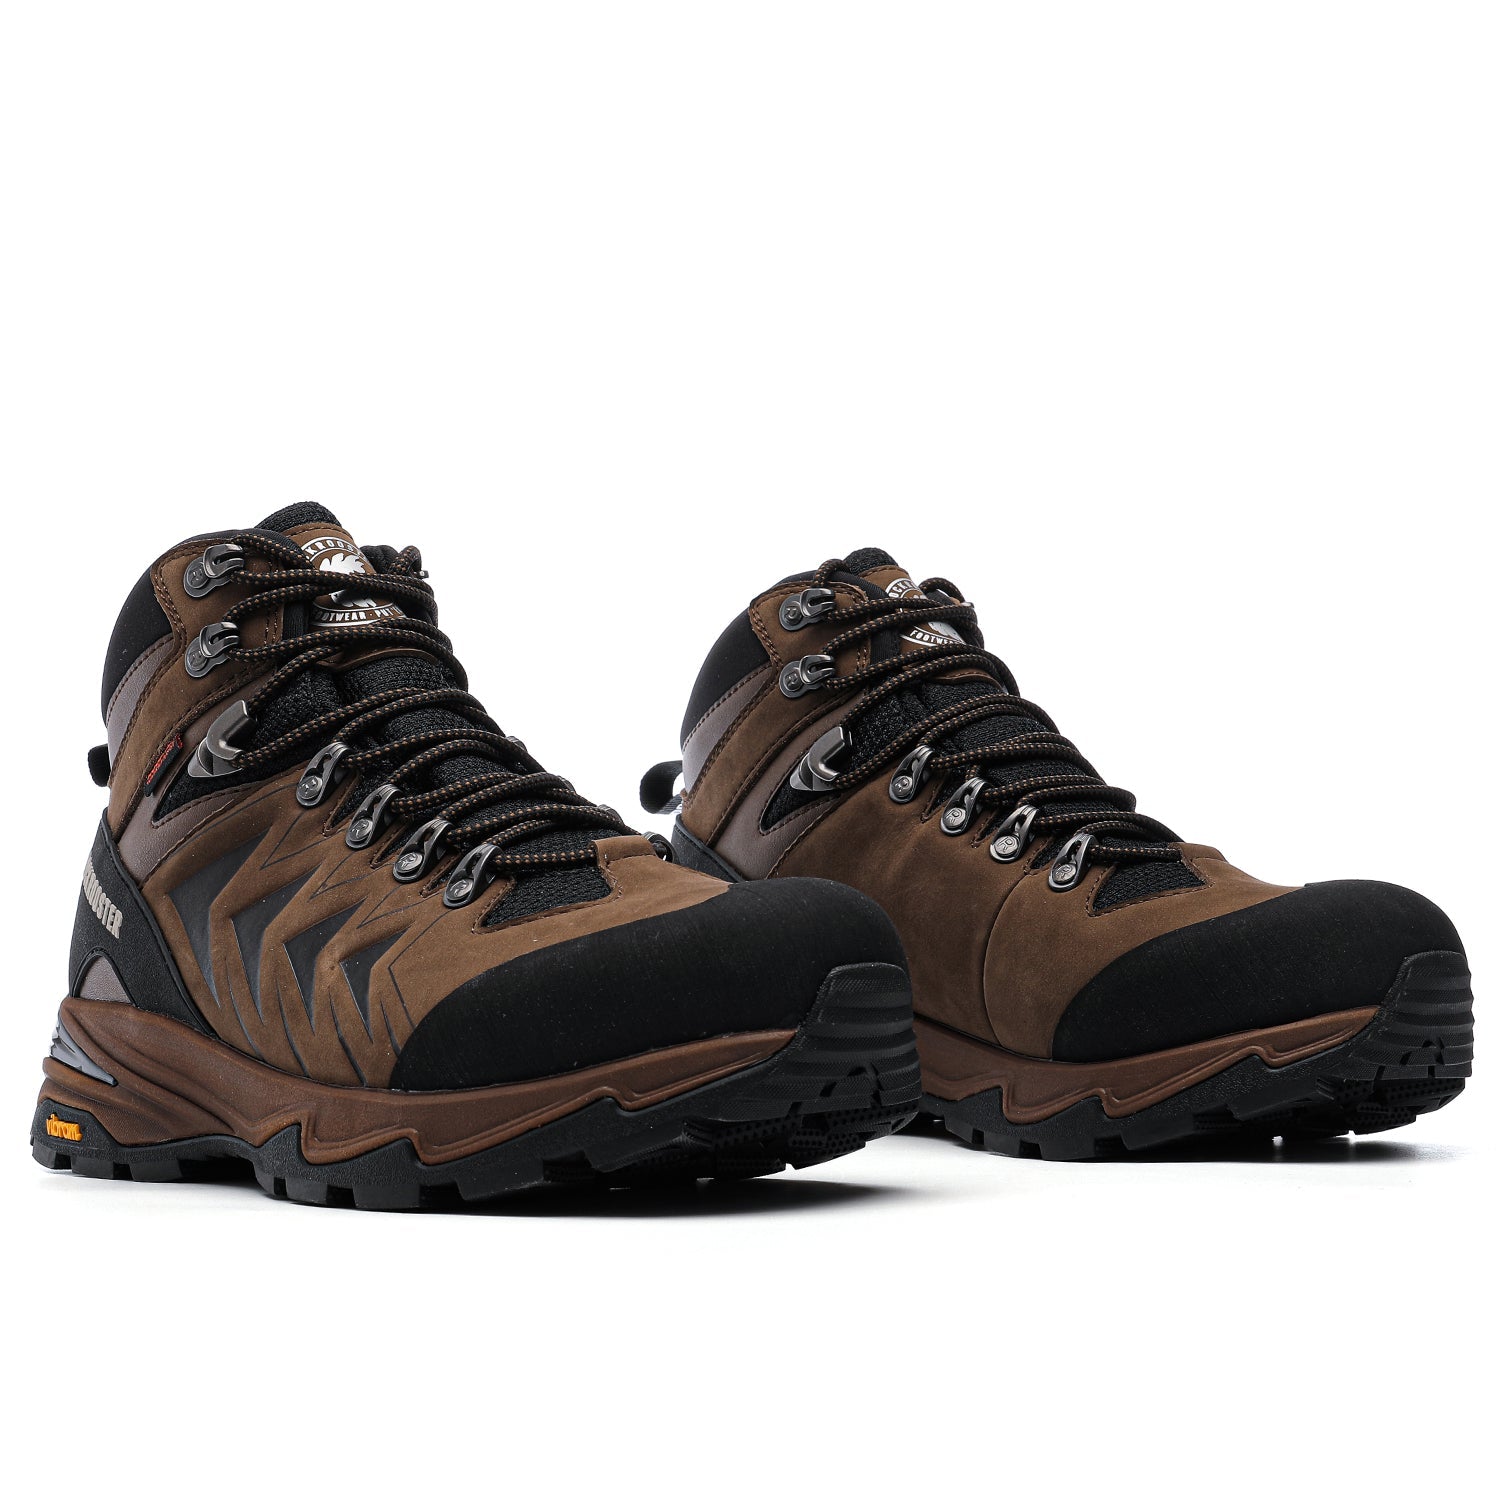 ROCKROOSTER Williamsburg Brown 6 Inch Waterproof Hiking Boots with - Mercantile Mountain